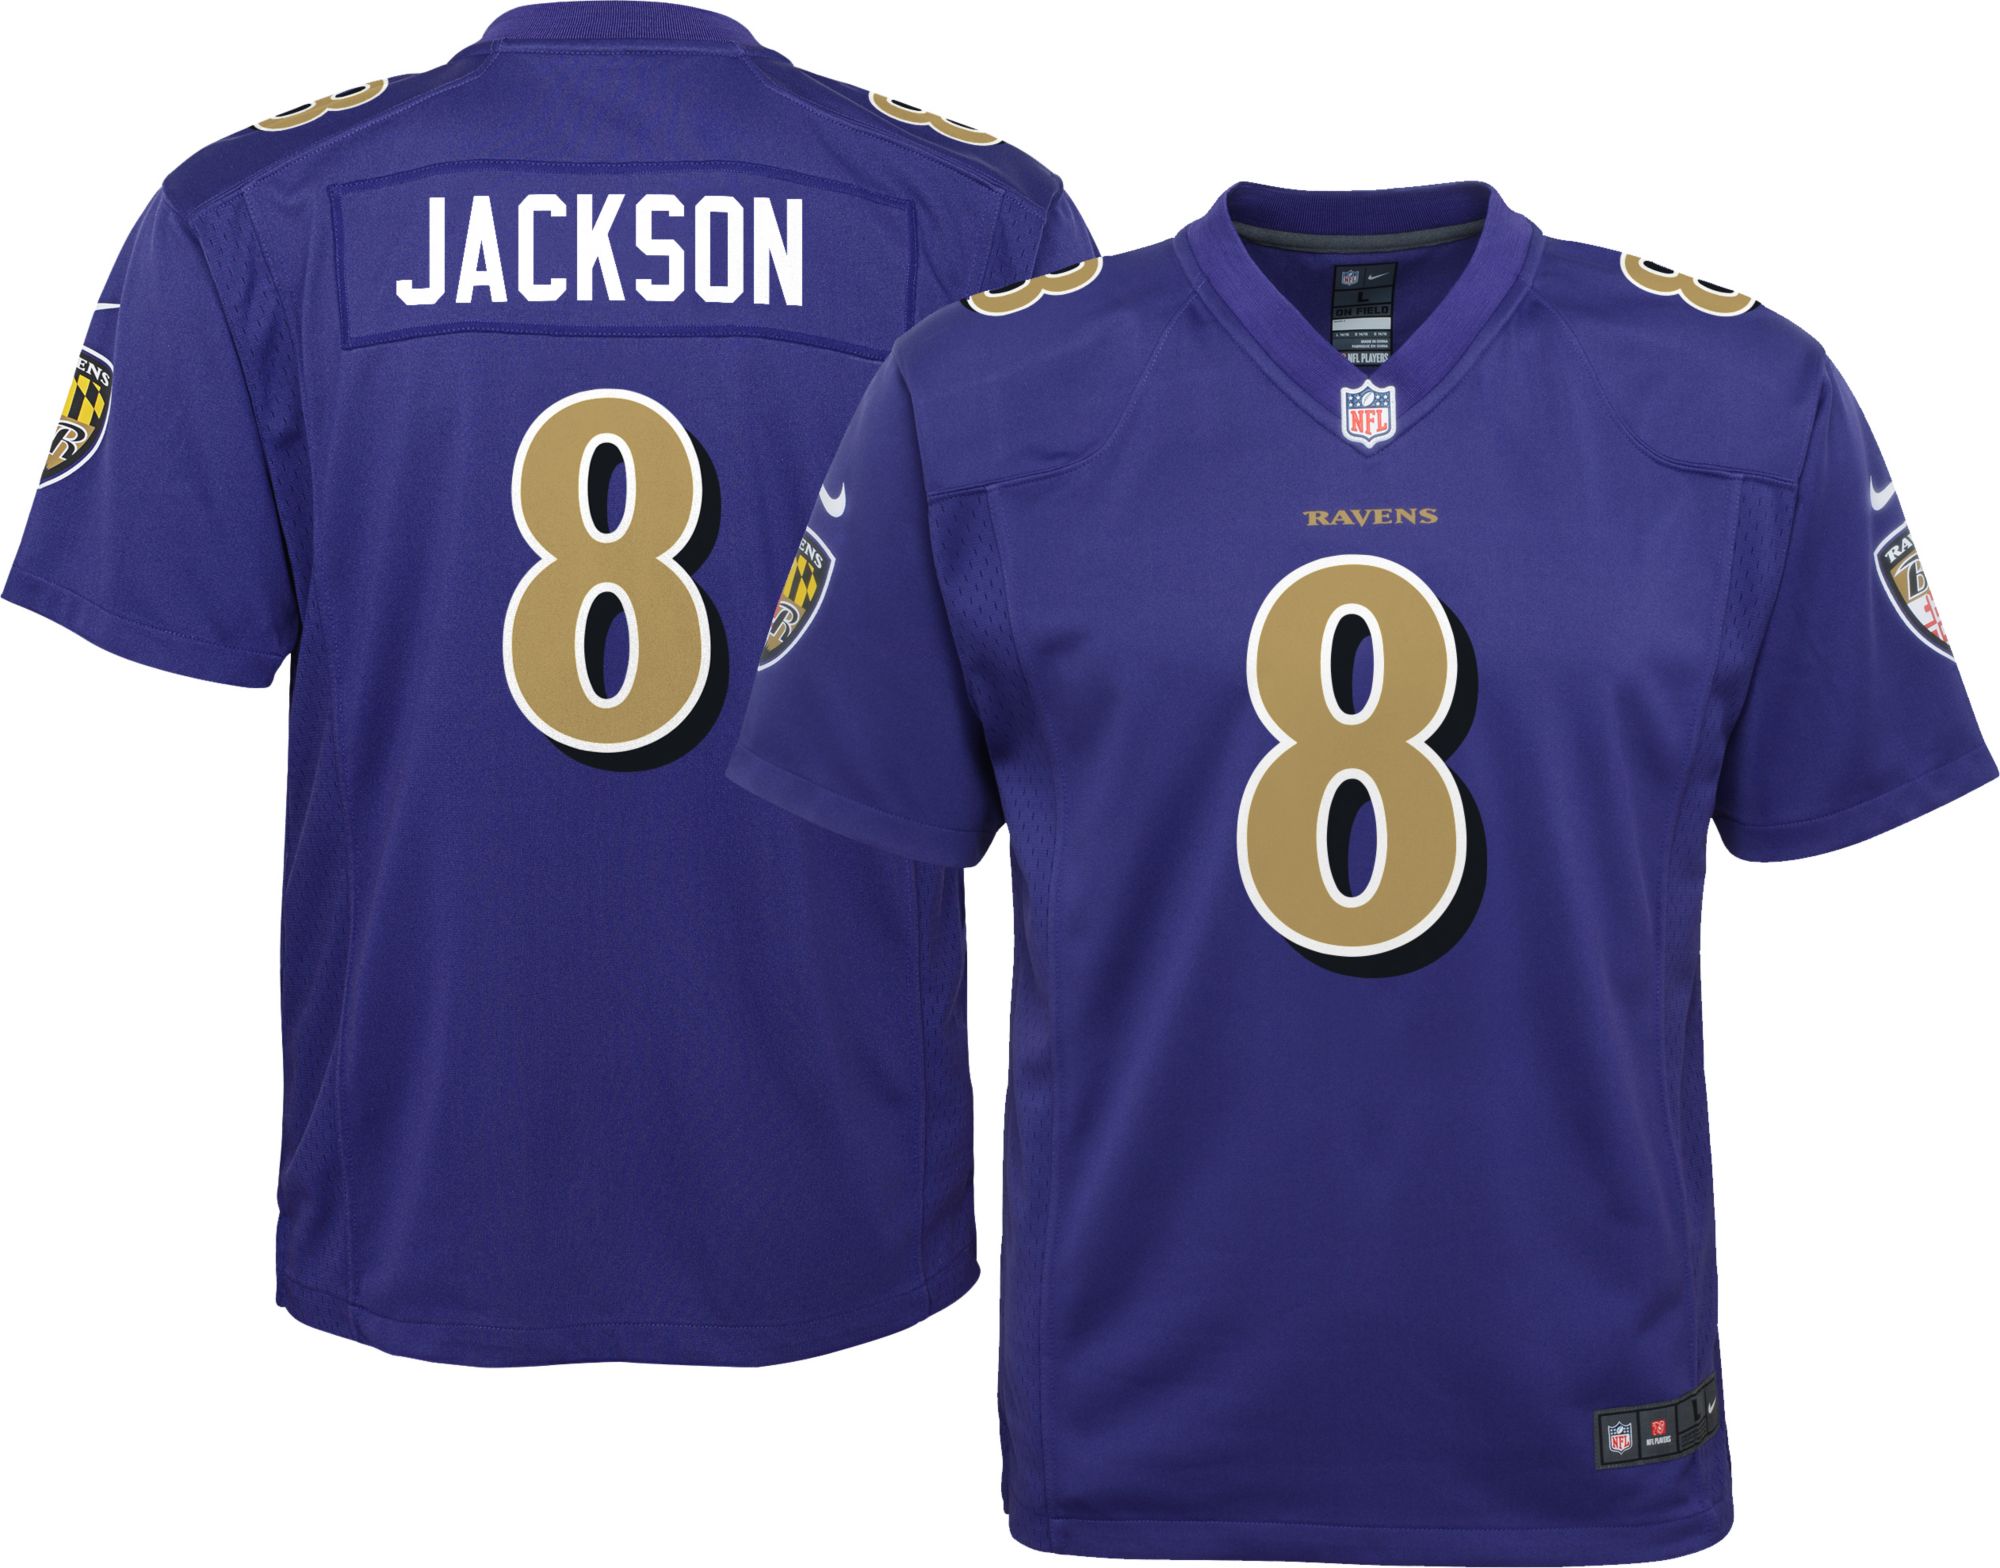 lamar jackson jersey for youth